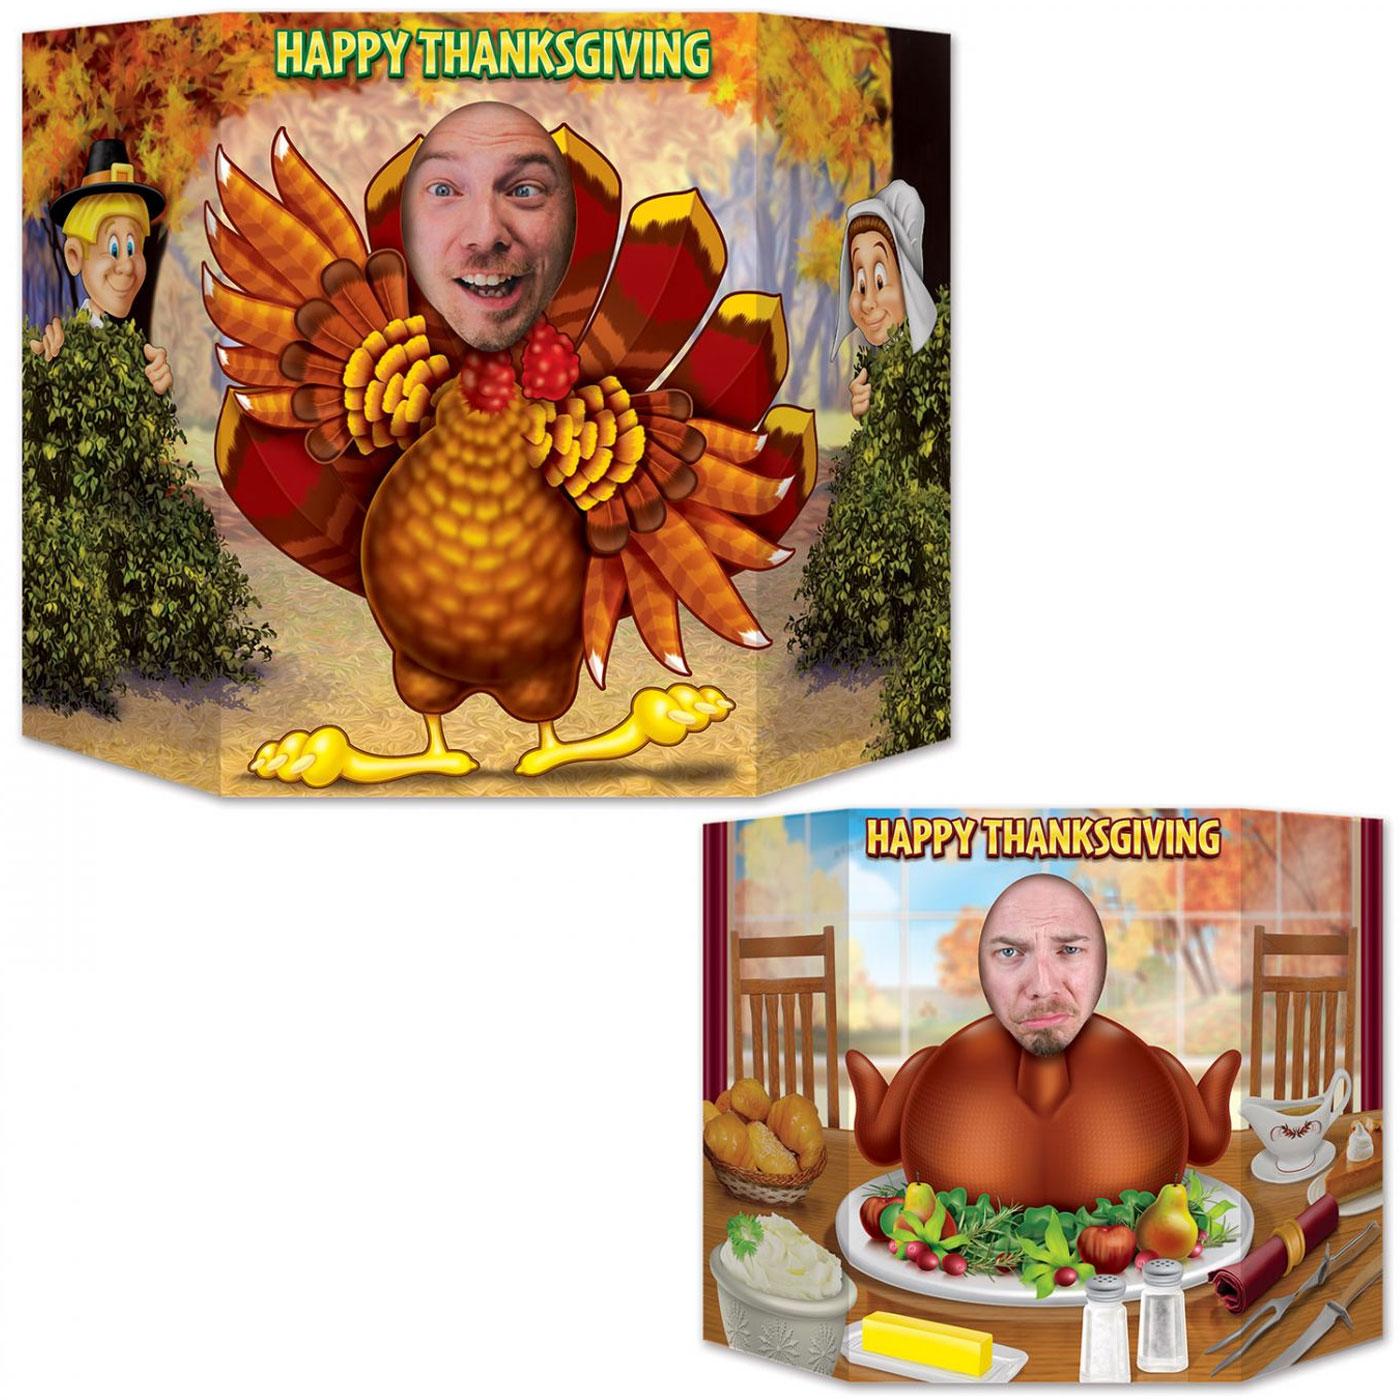 Happy Thanksgiving Photo Prop - 37" x  25" Double Sided by Beistle 99993 available here at Karnival Costumes online party shop